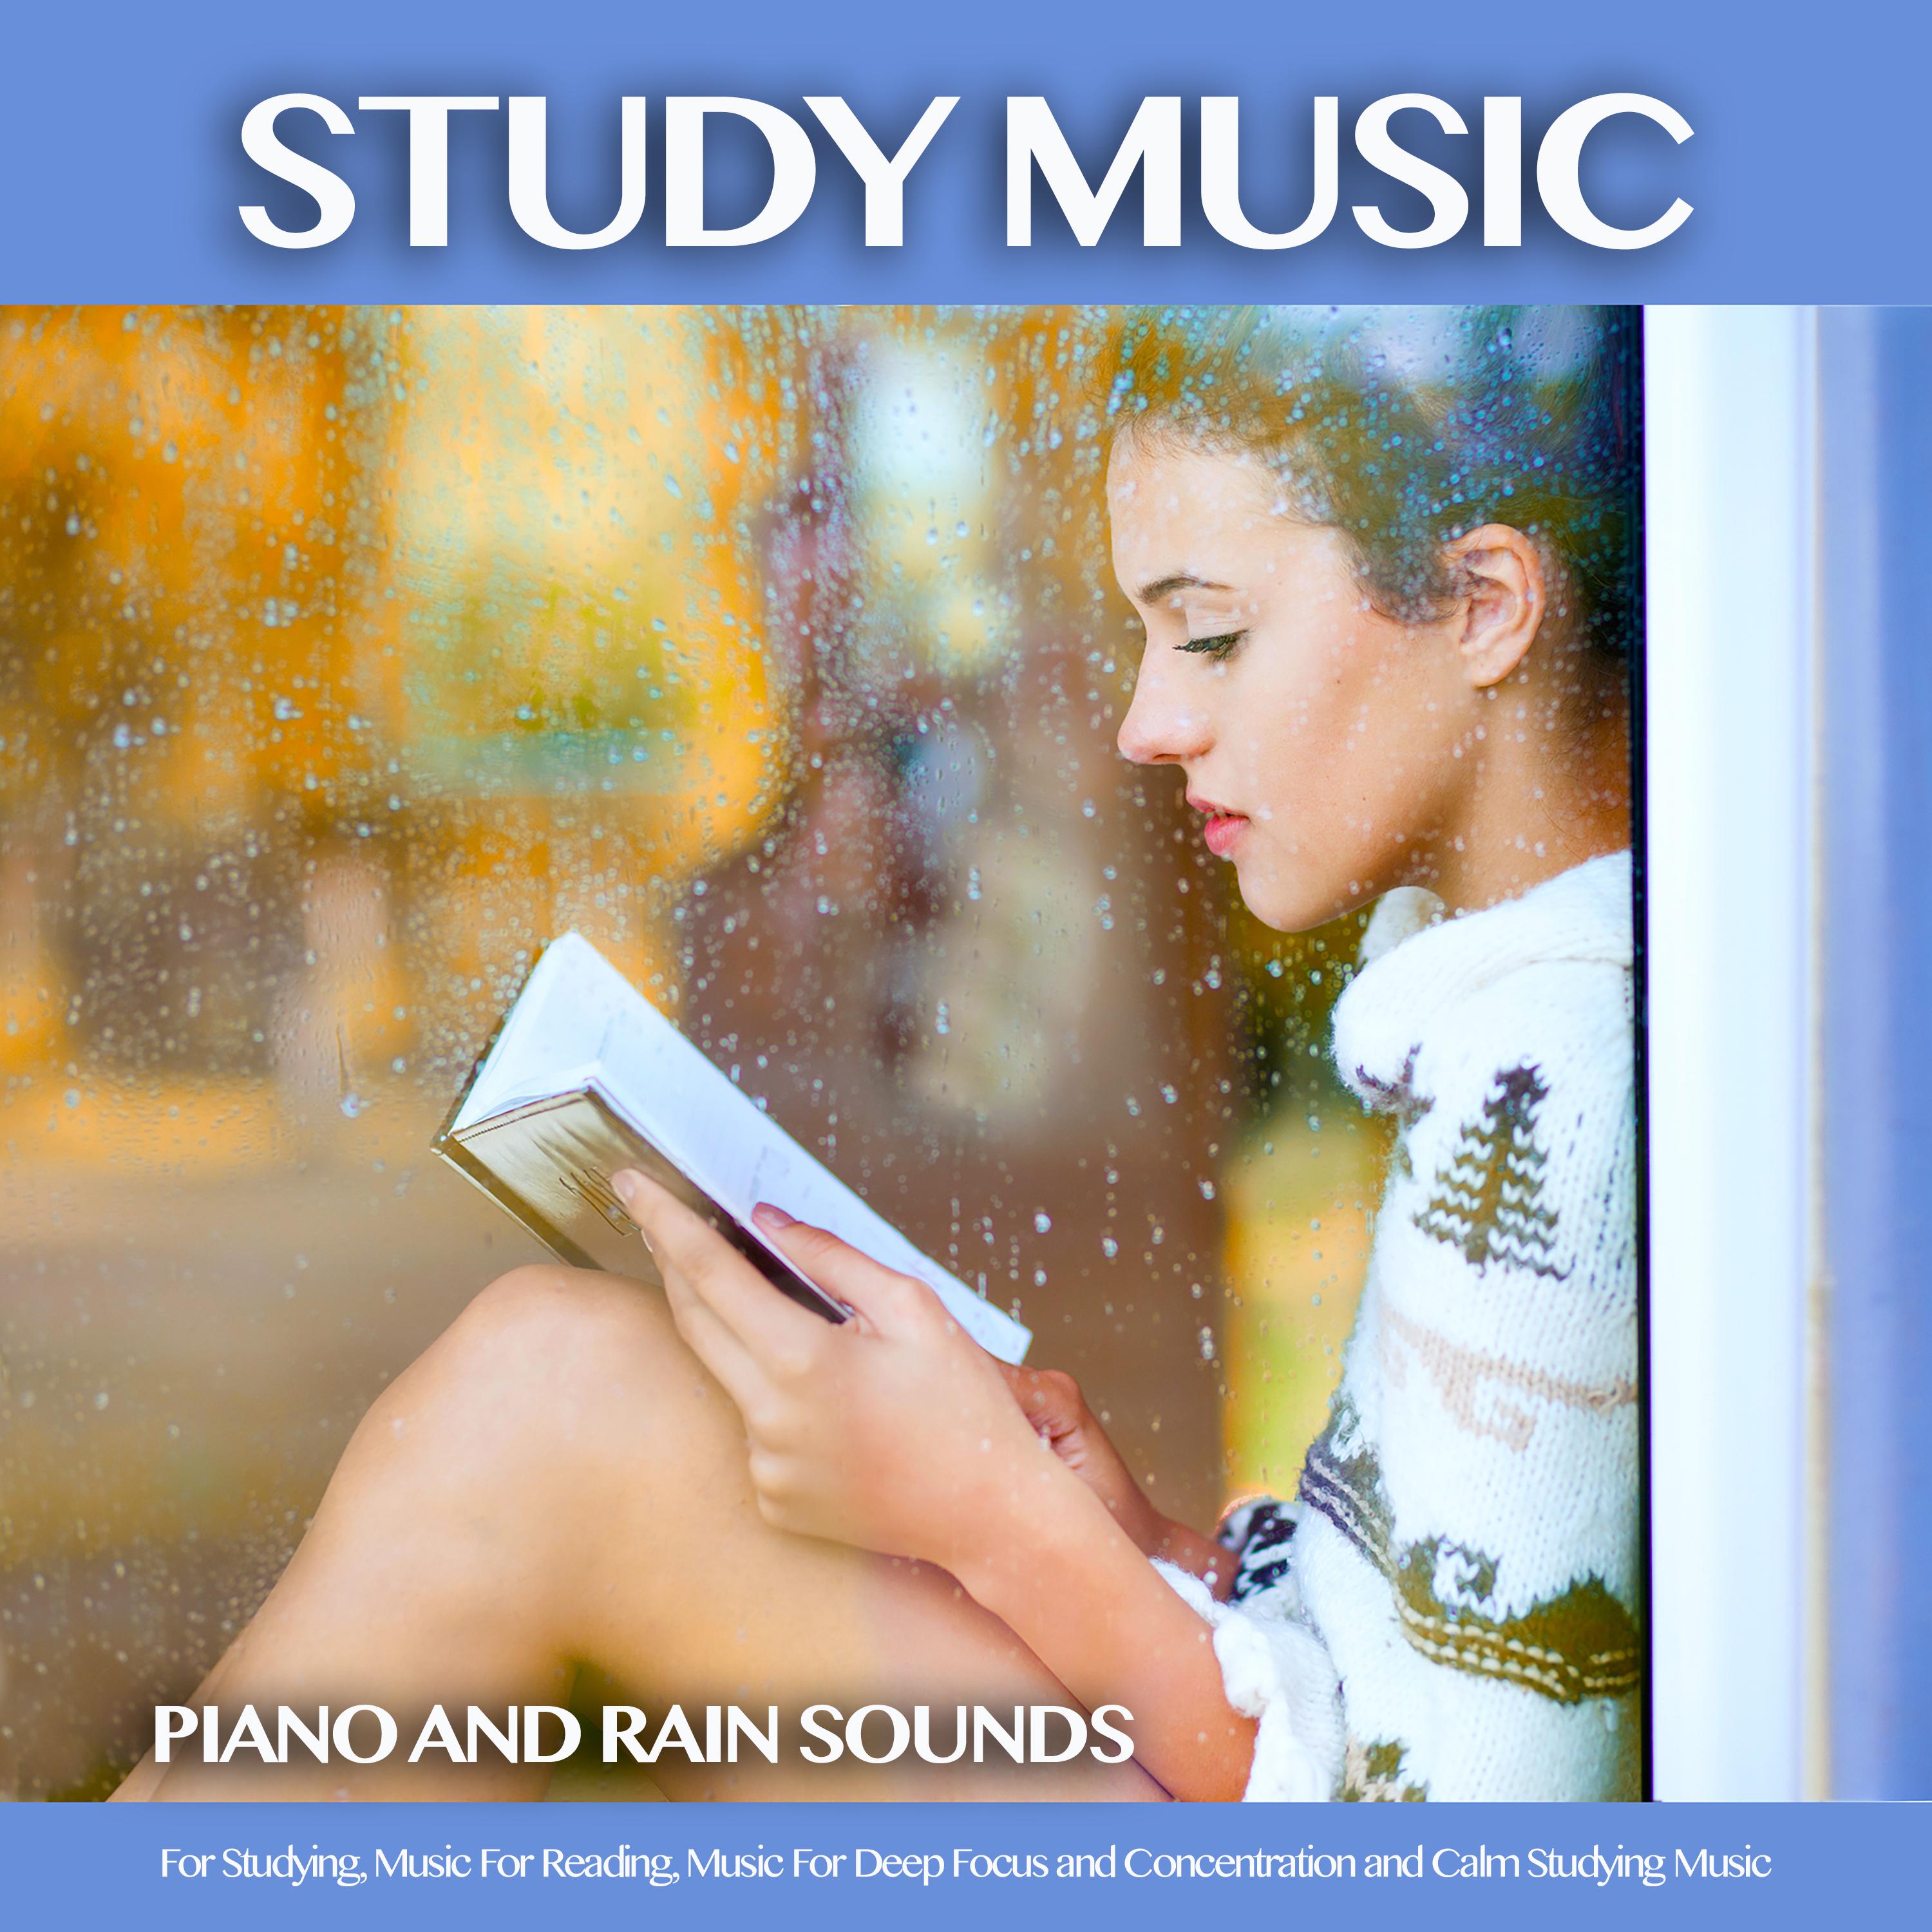 Tranquil Piano For Concentration and Focus